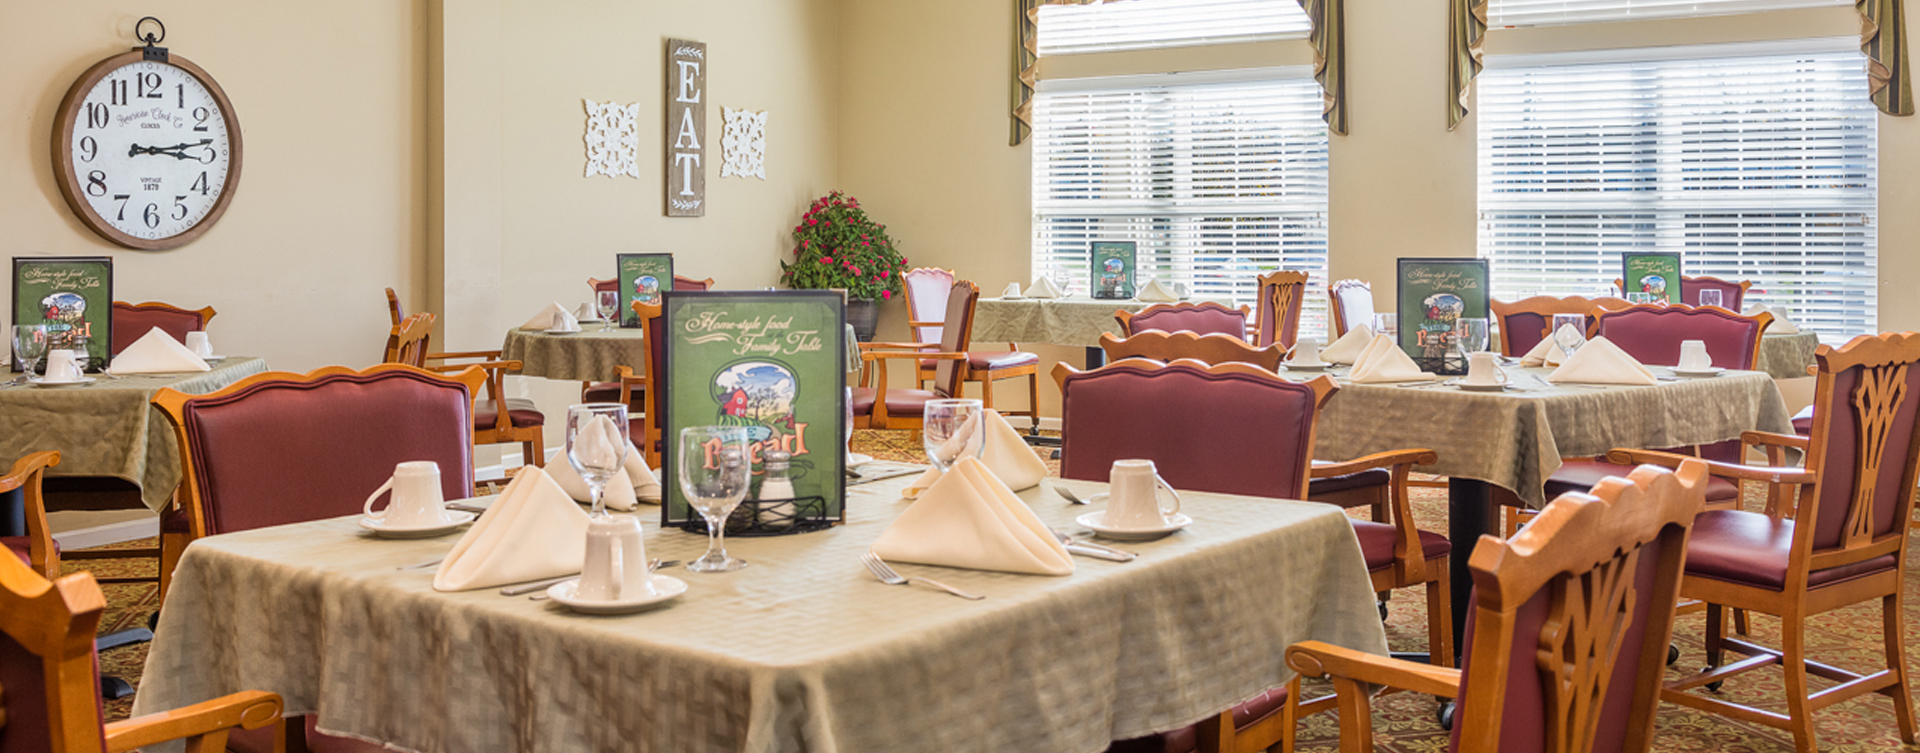 Enjoy homestyle food with made-from-scratch recipes in our dining room at Bickford of Ames